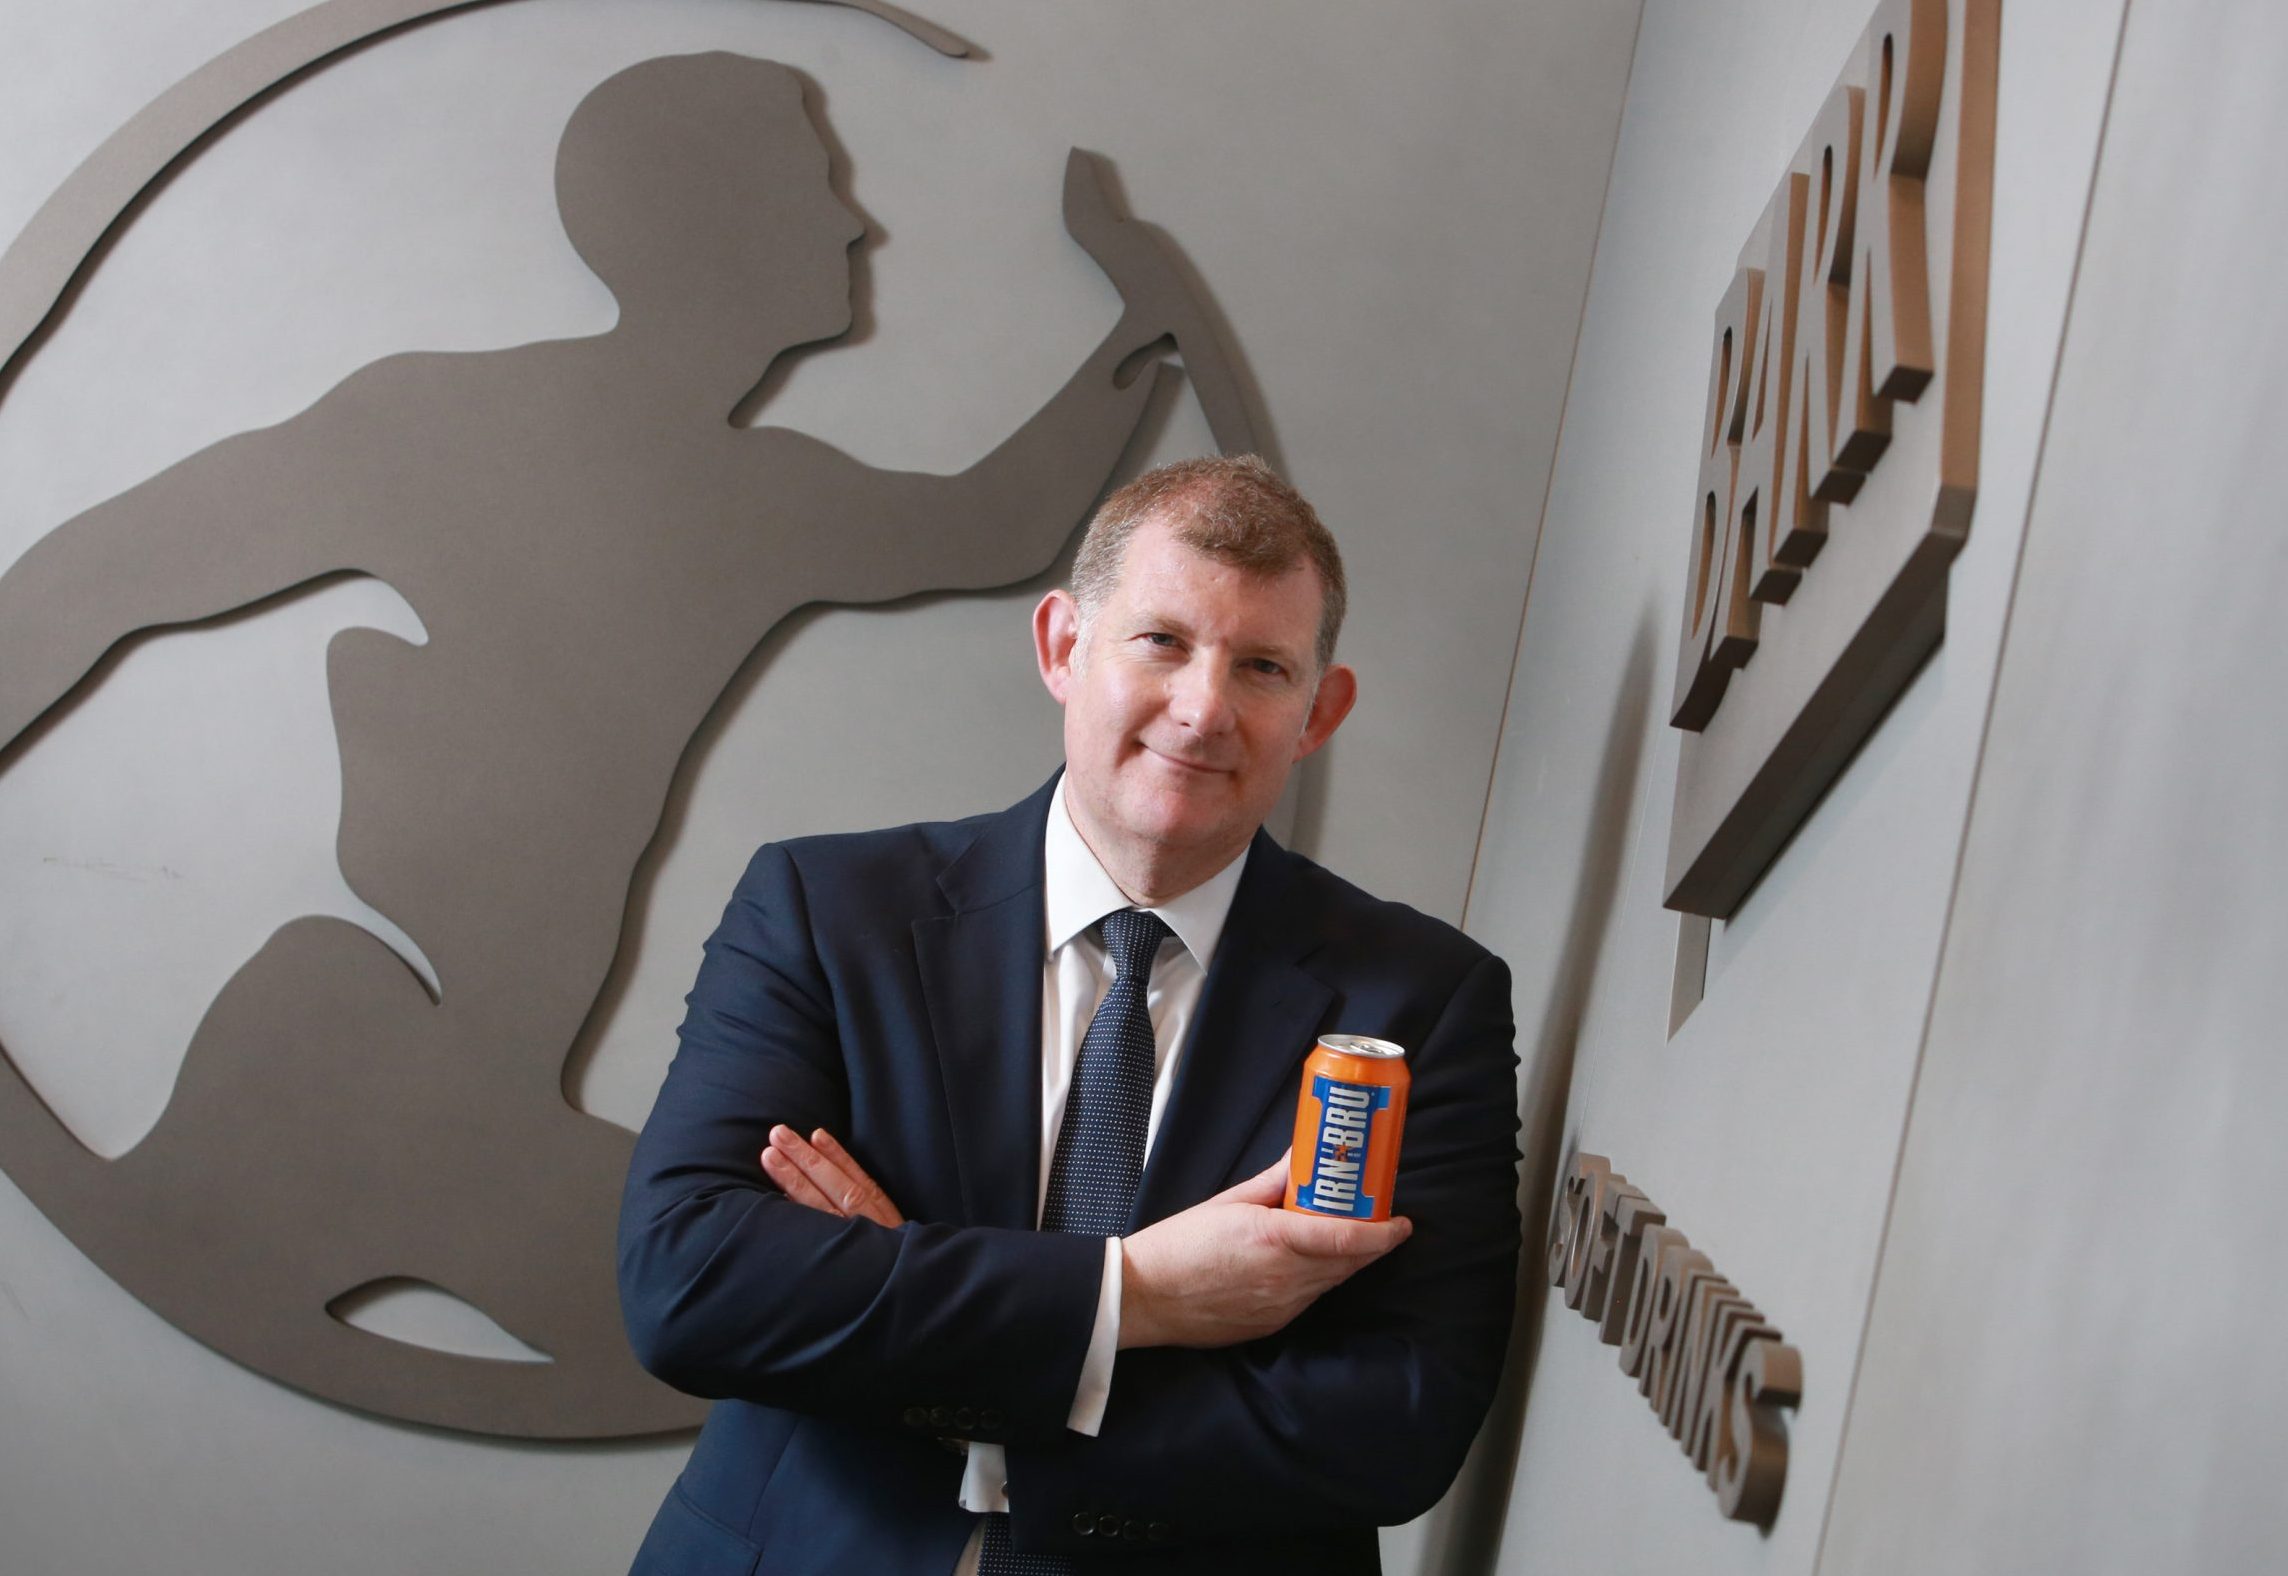 AG Barr acquires Rio soft drinks in £12.3m deal